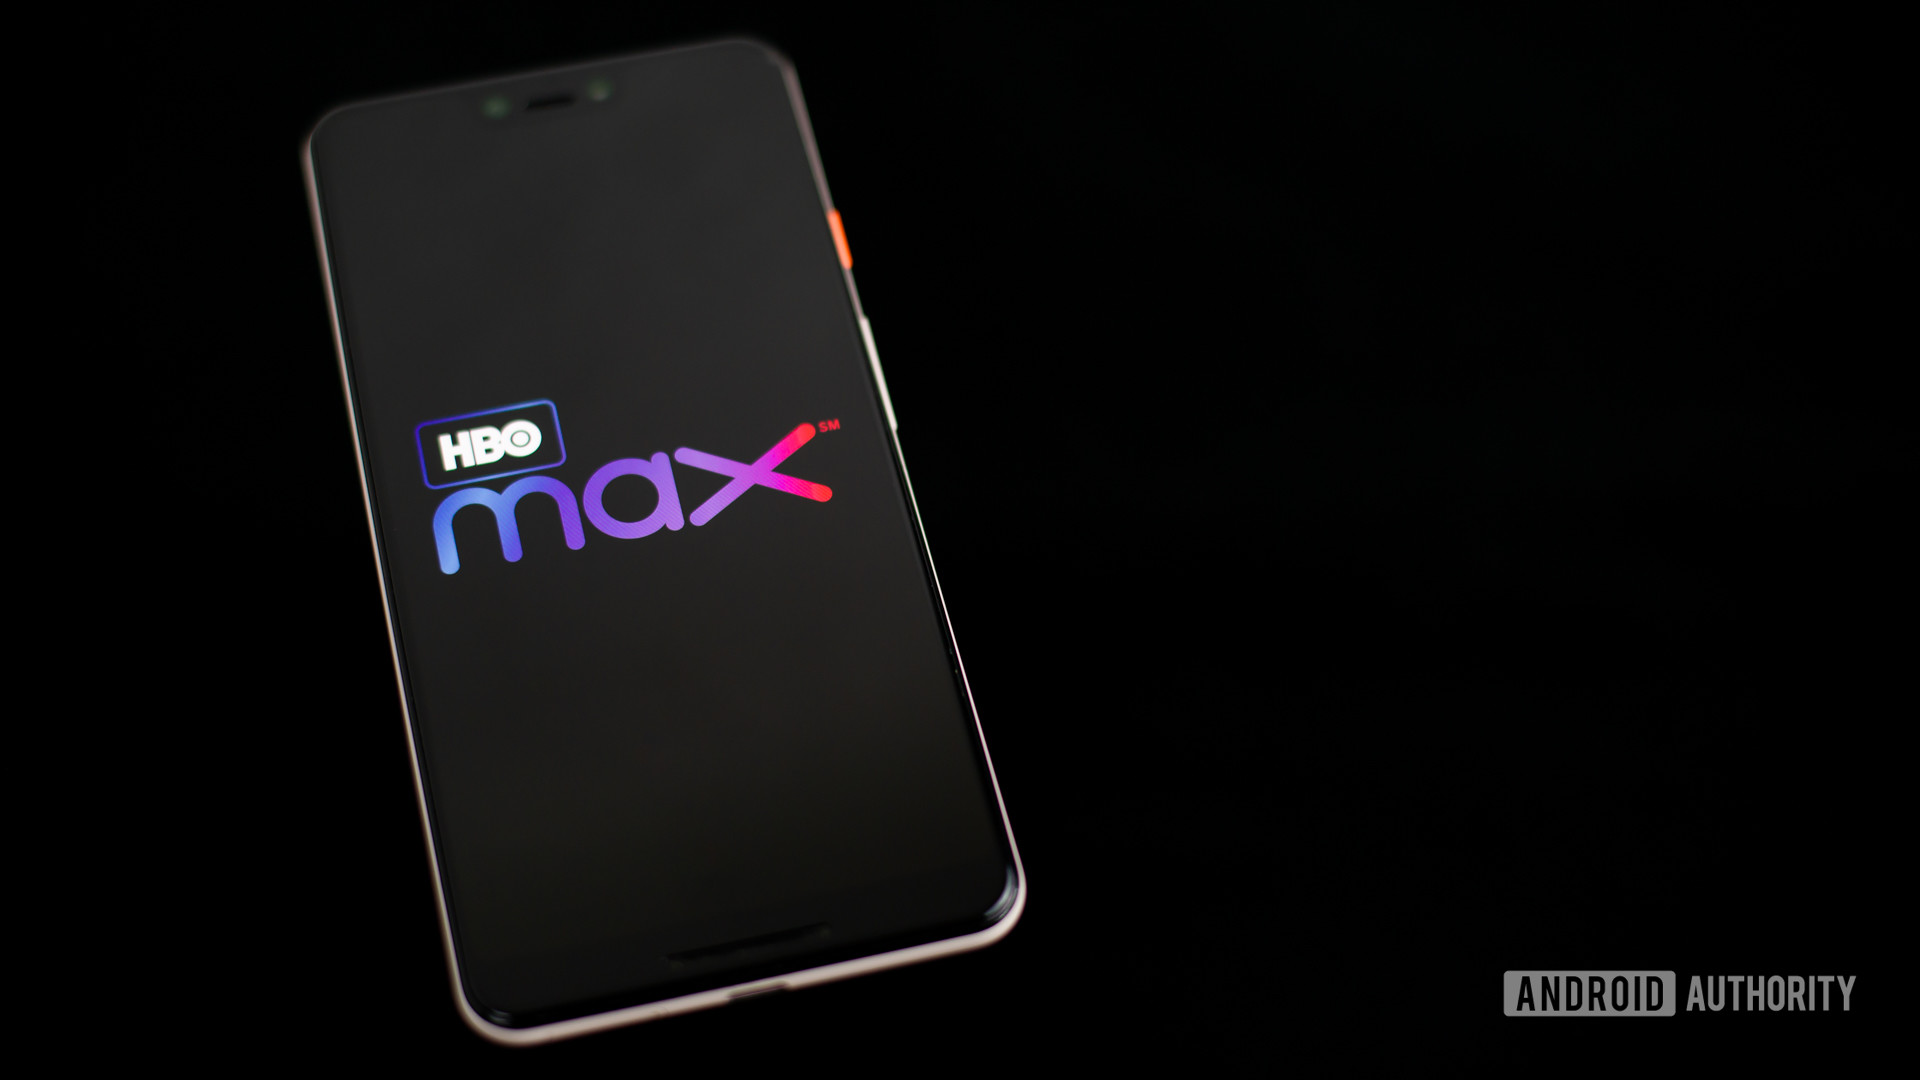 HBO Max logo on smartphone stock photo 2 — HBO Max with ads